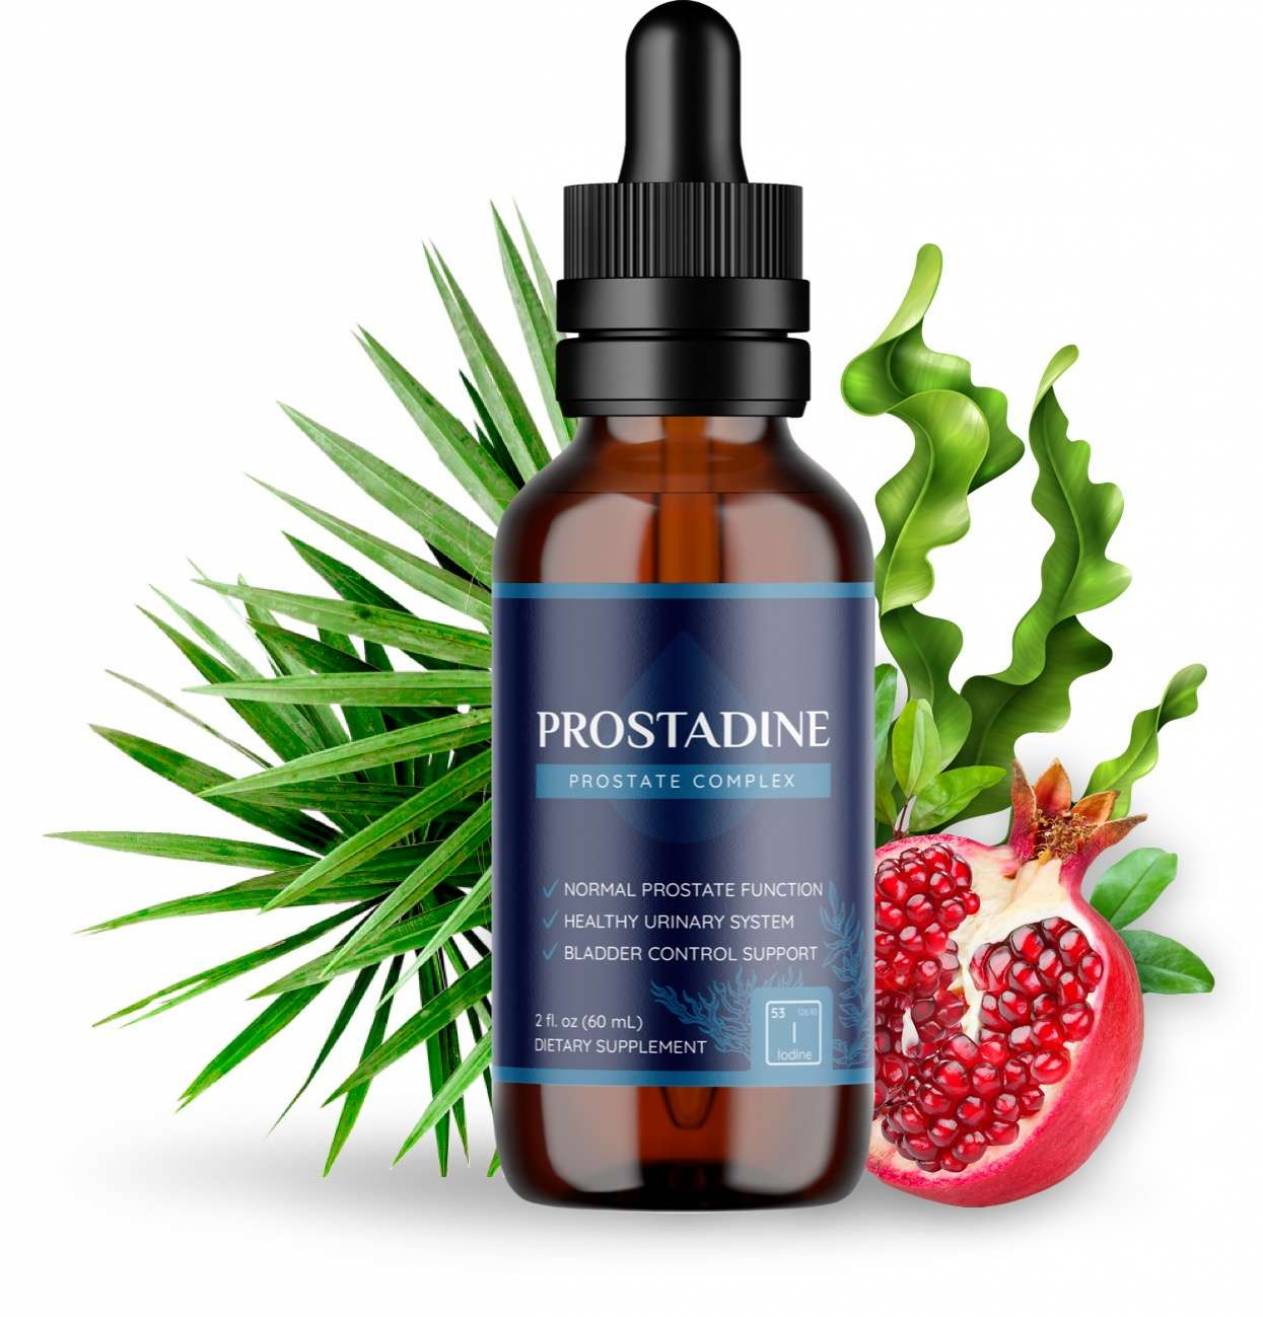 What Is The Best Price For Prostadine